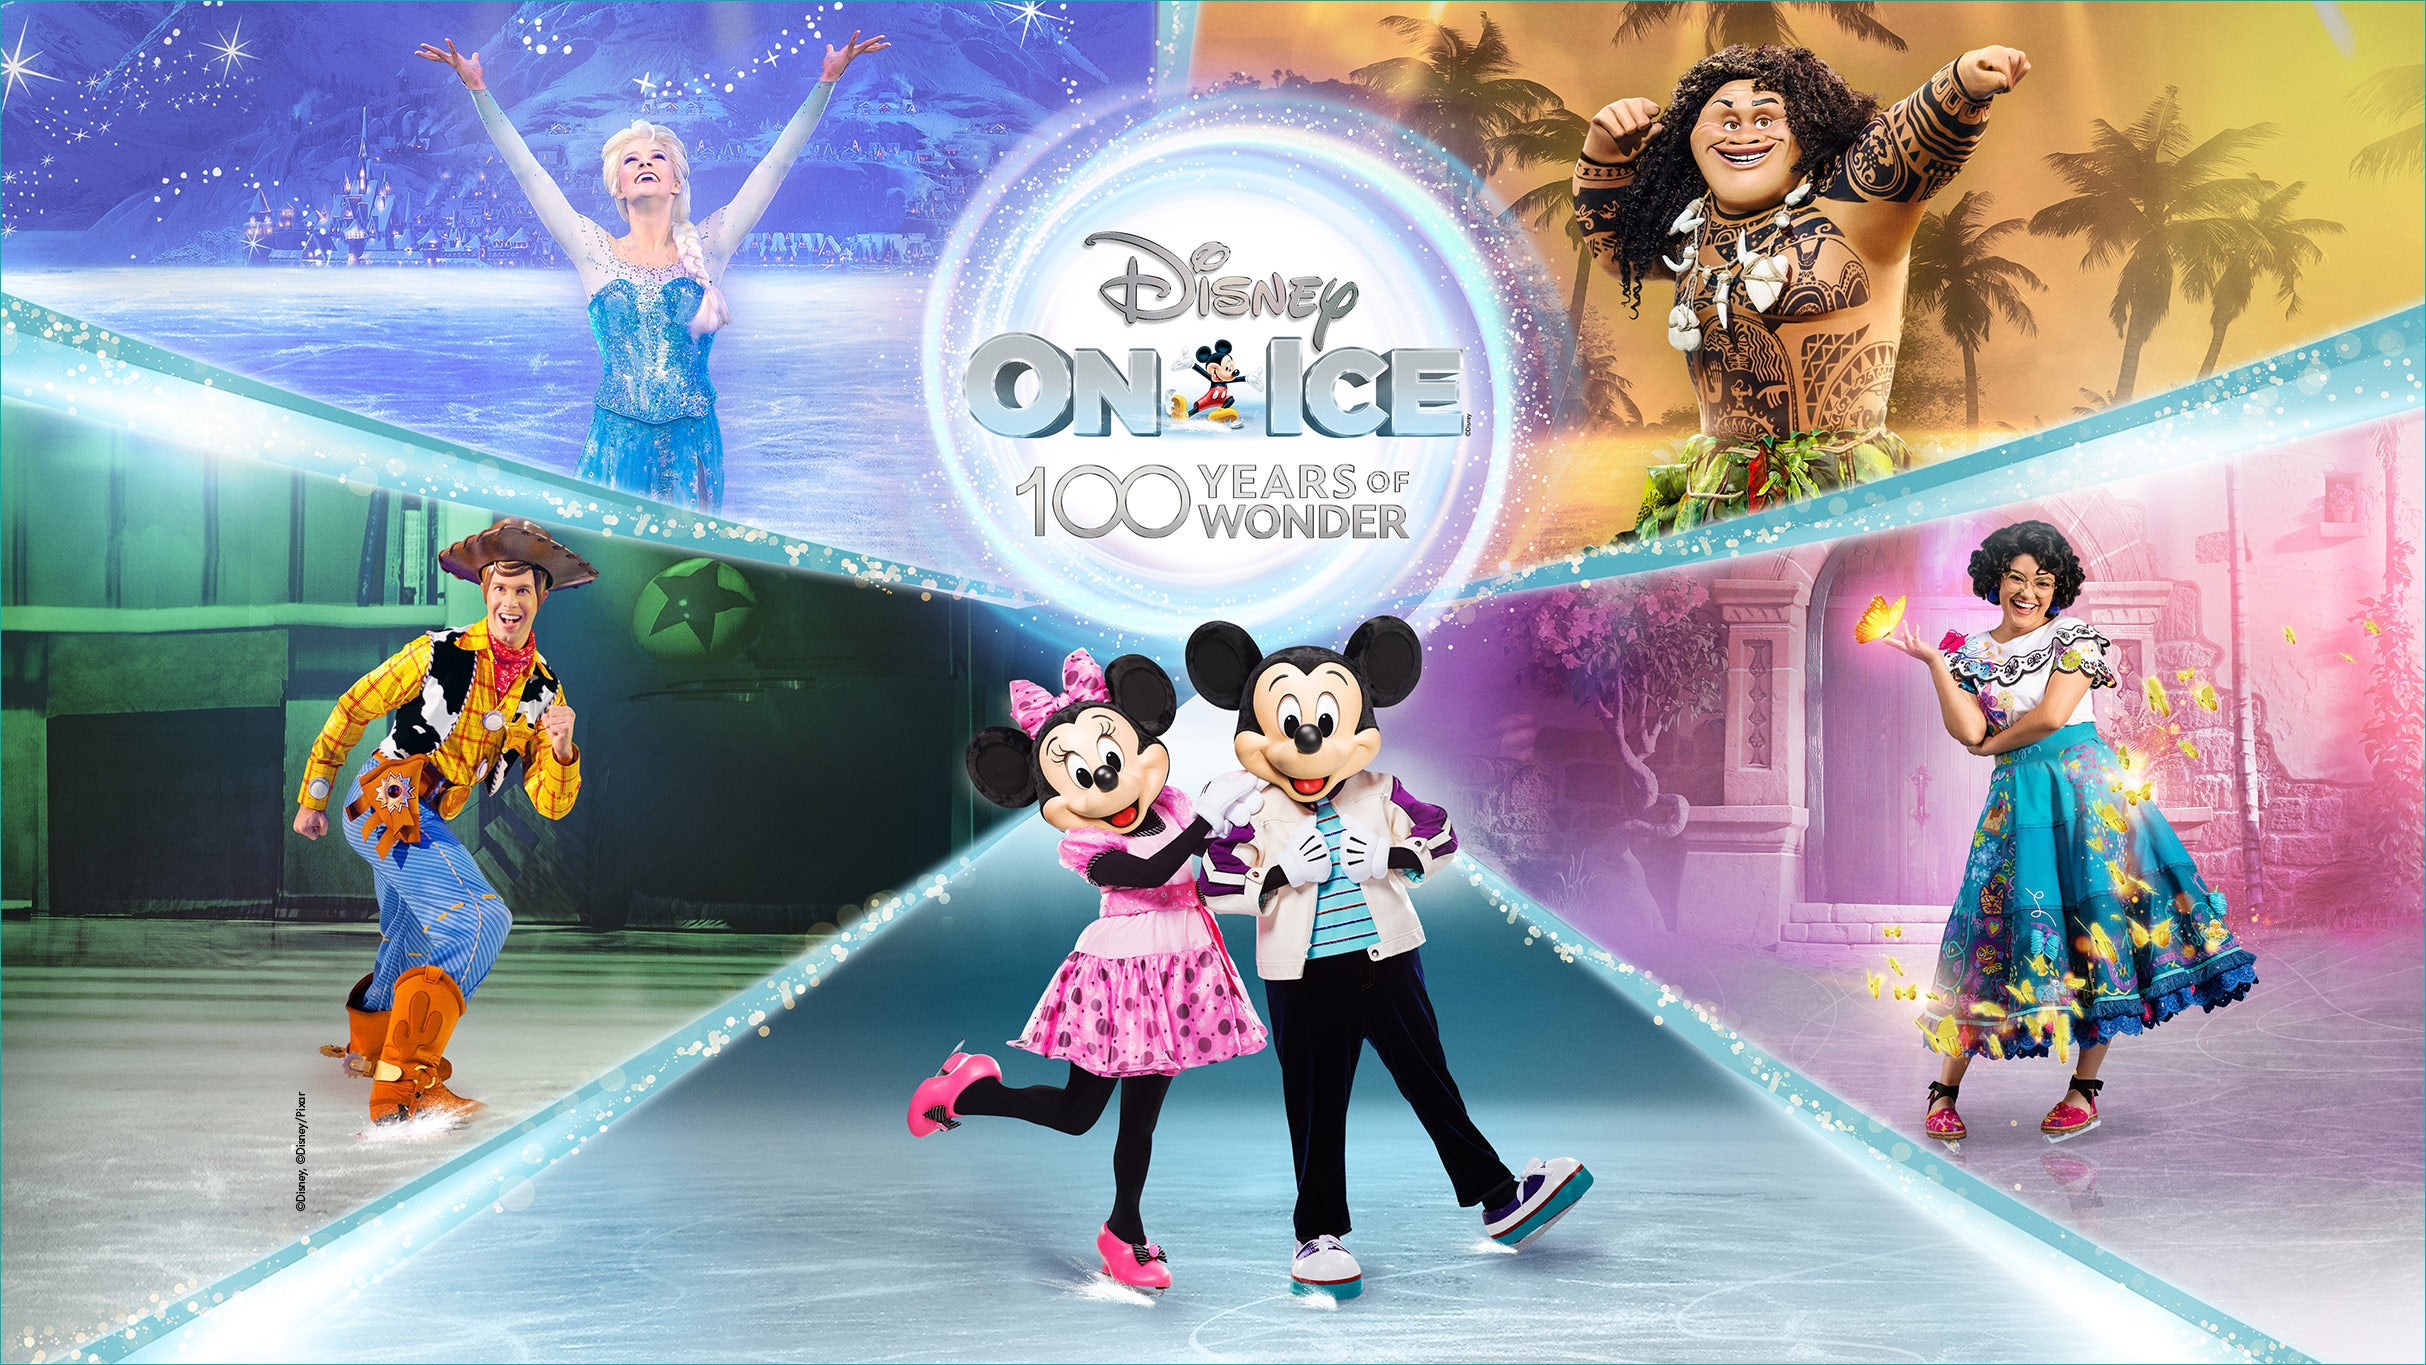 Disney On Ice presents 100 Years of Wonder in Birmingham promo photo for Ticketmaster presale offer code